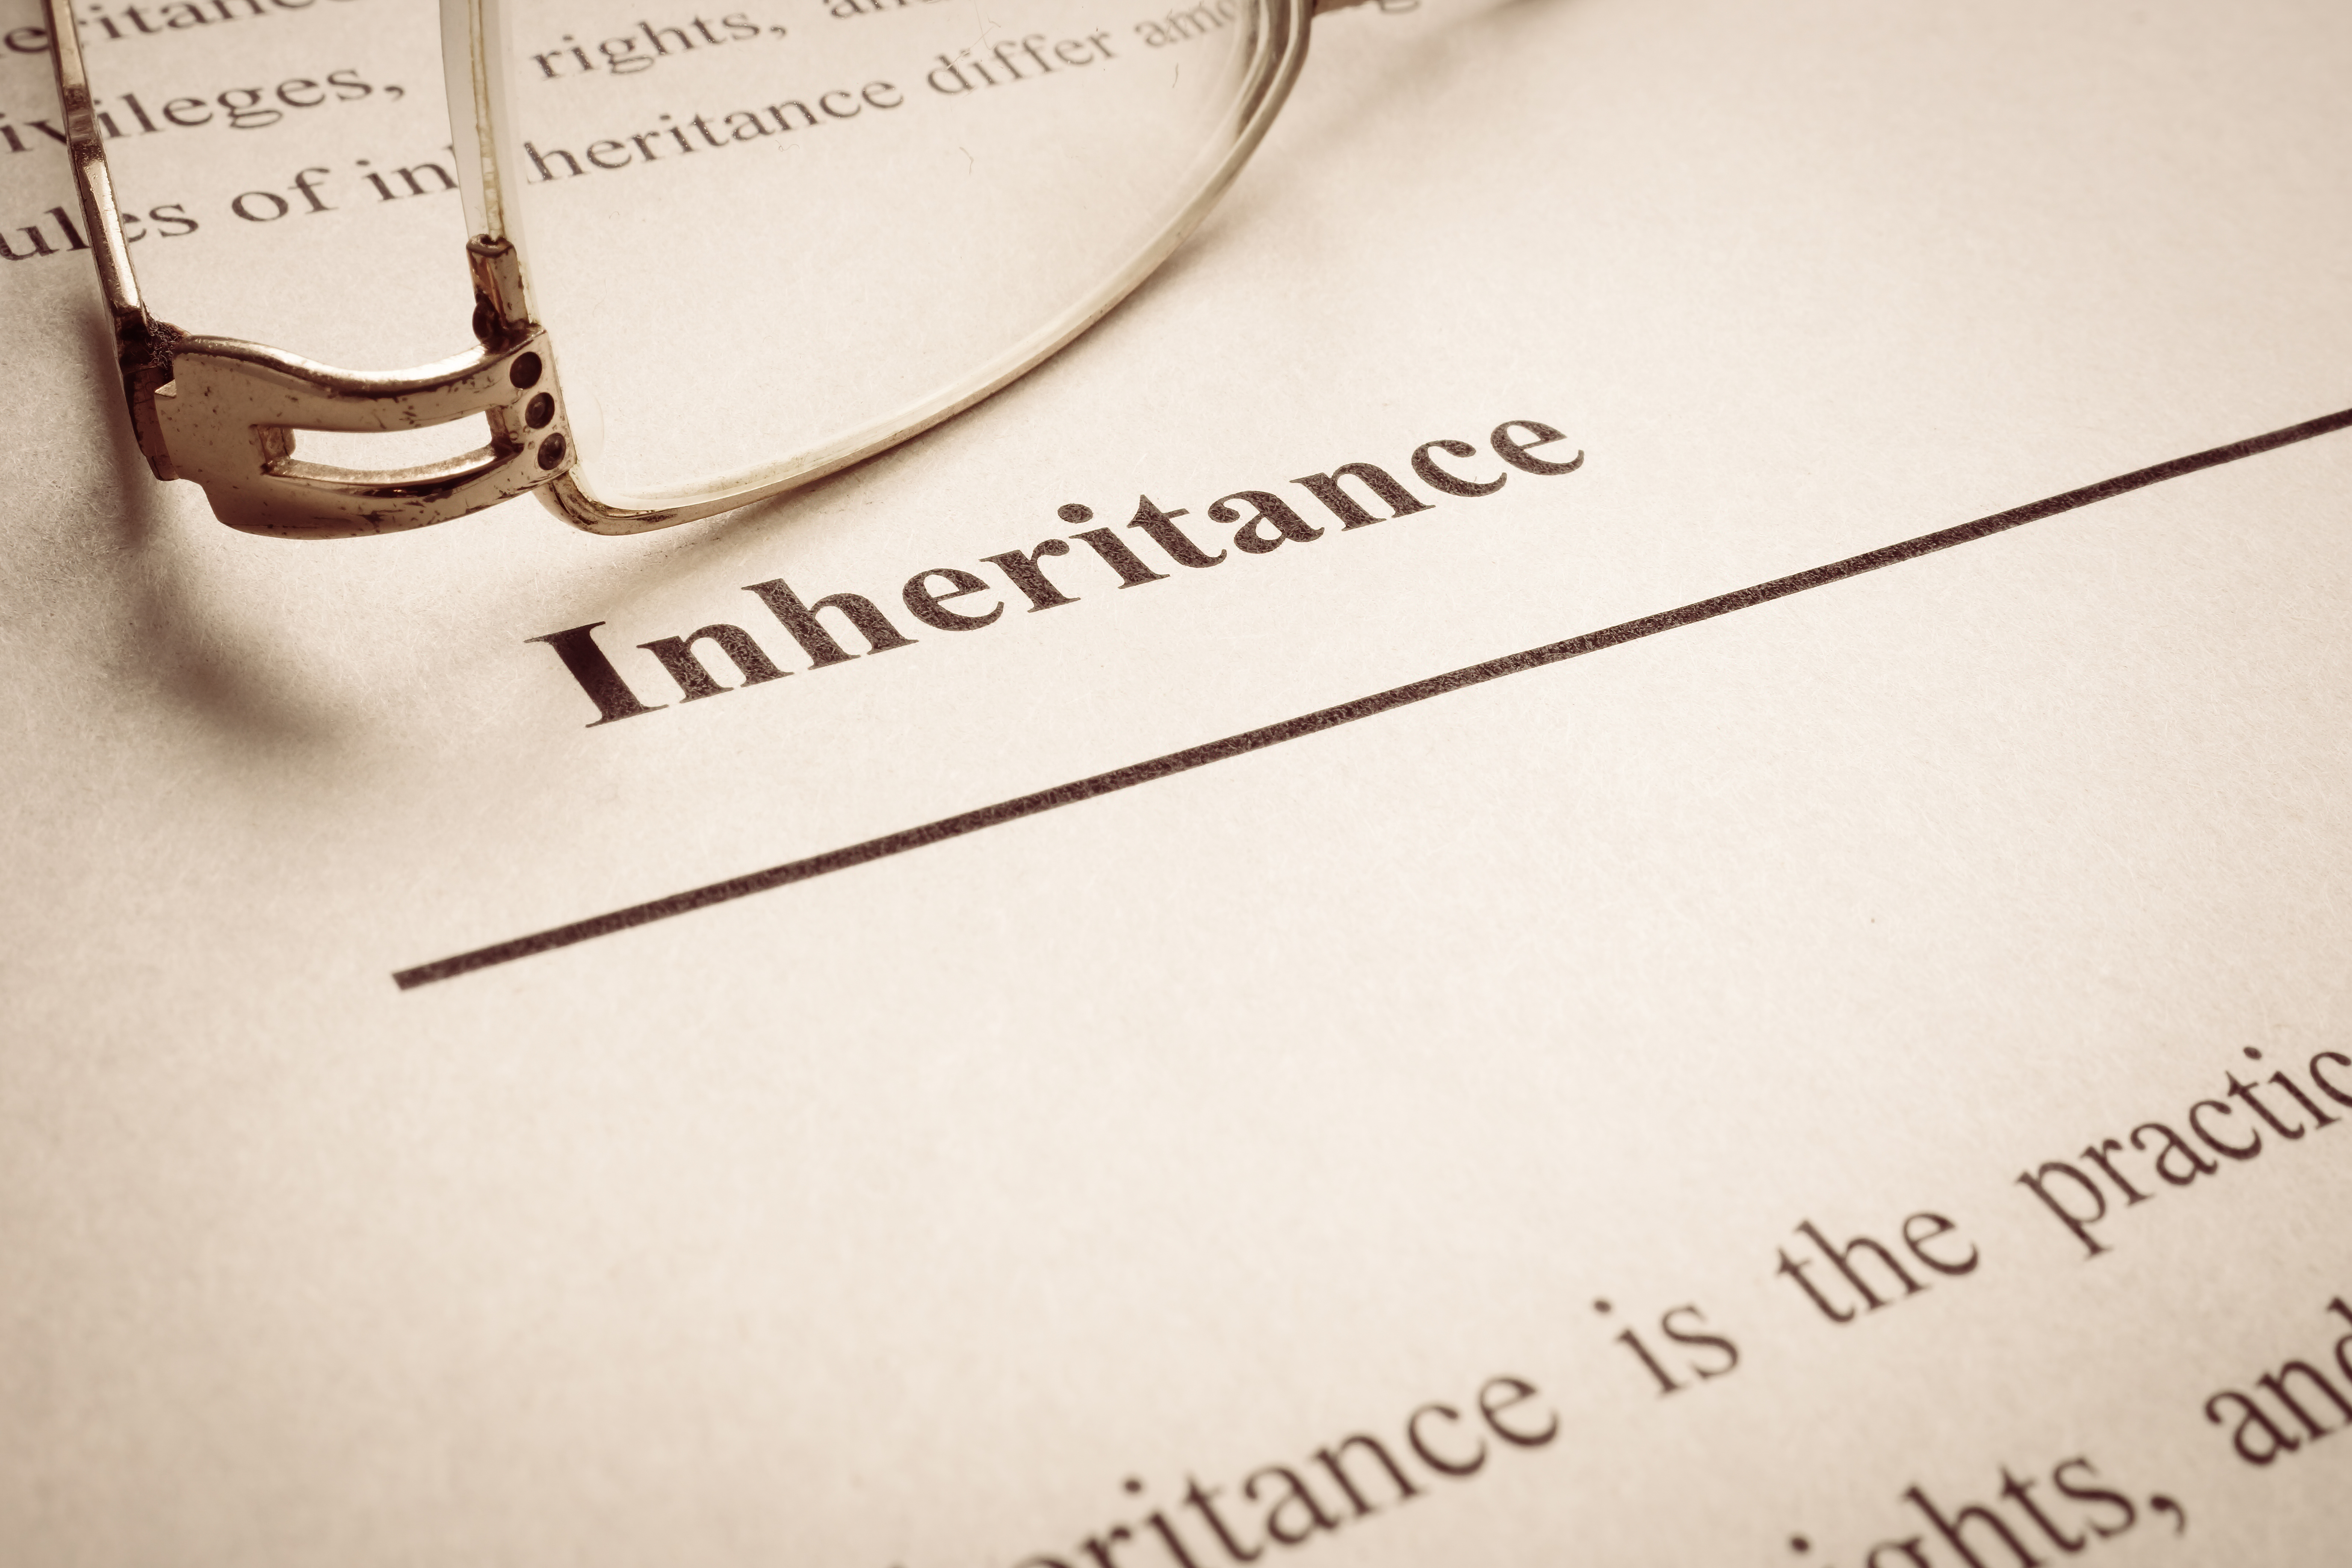 Closeup of a reading glasses lying on top of a piece of paper titled INHERITANCE with some visible text, posing the question, Why am I asked about receiving any inheritance during bankruptcy?